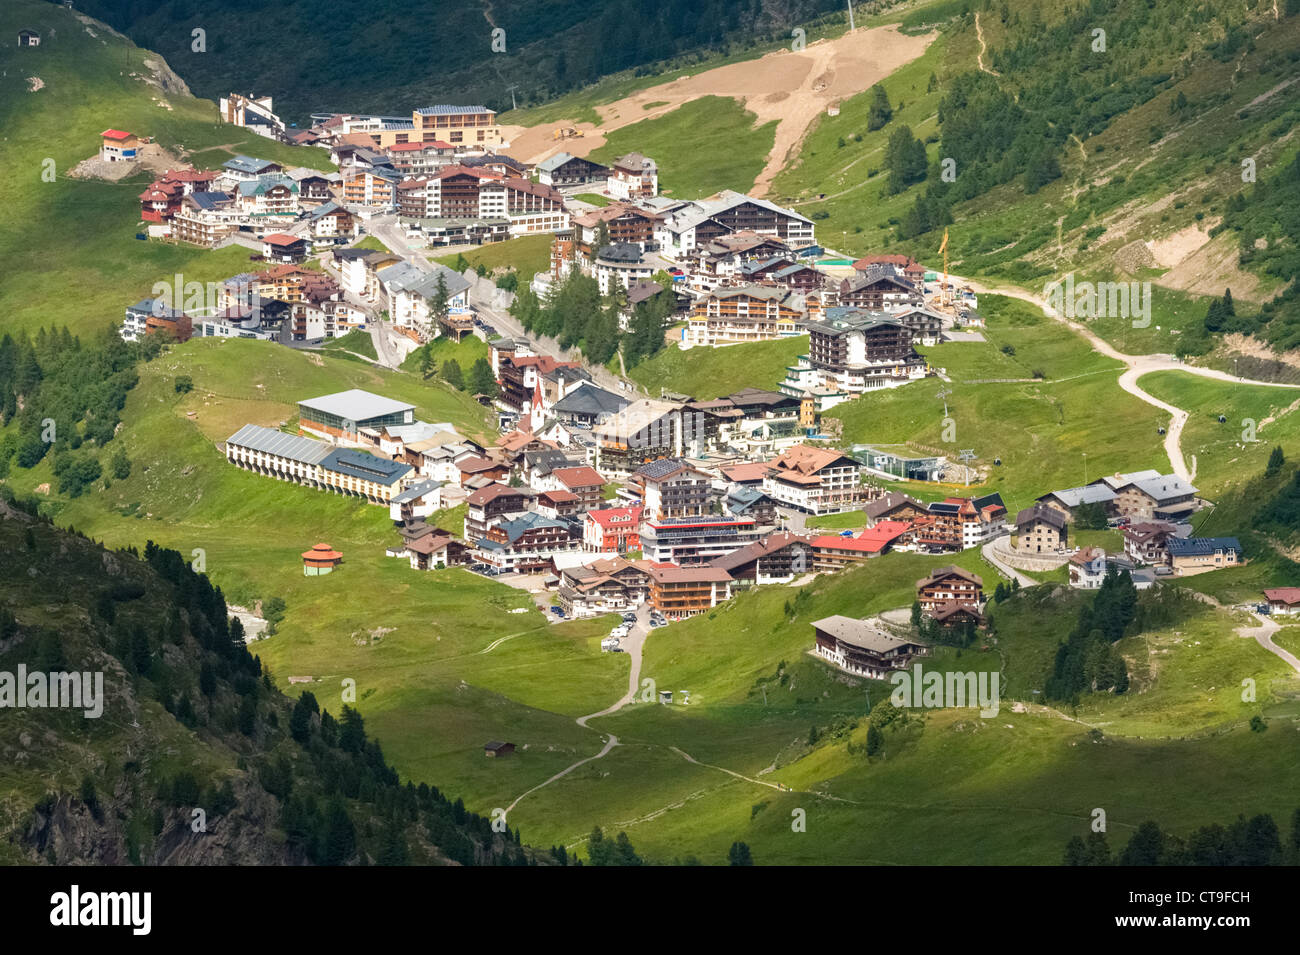 Looking down on Obergurgl in the Austrian Alps from the path that leads up to Ramolhaus. Stock Photo